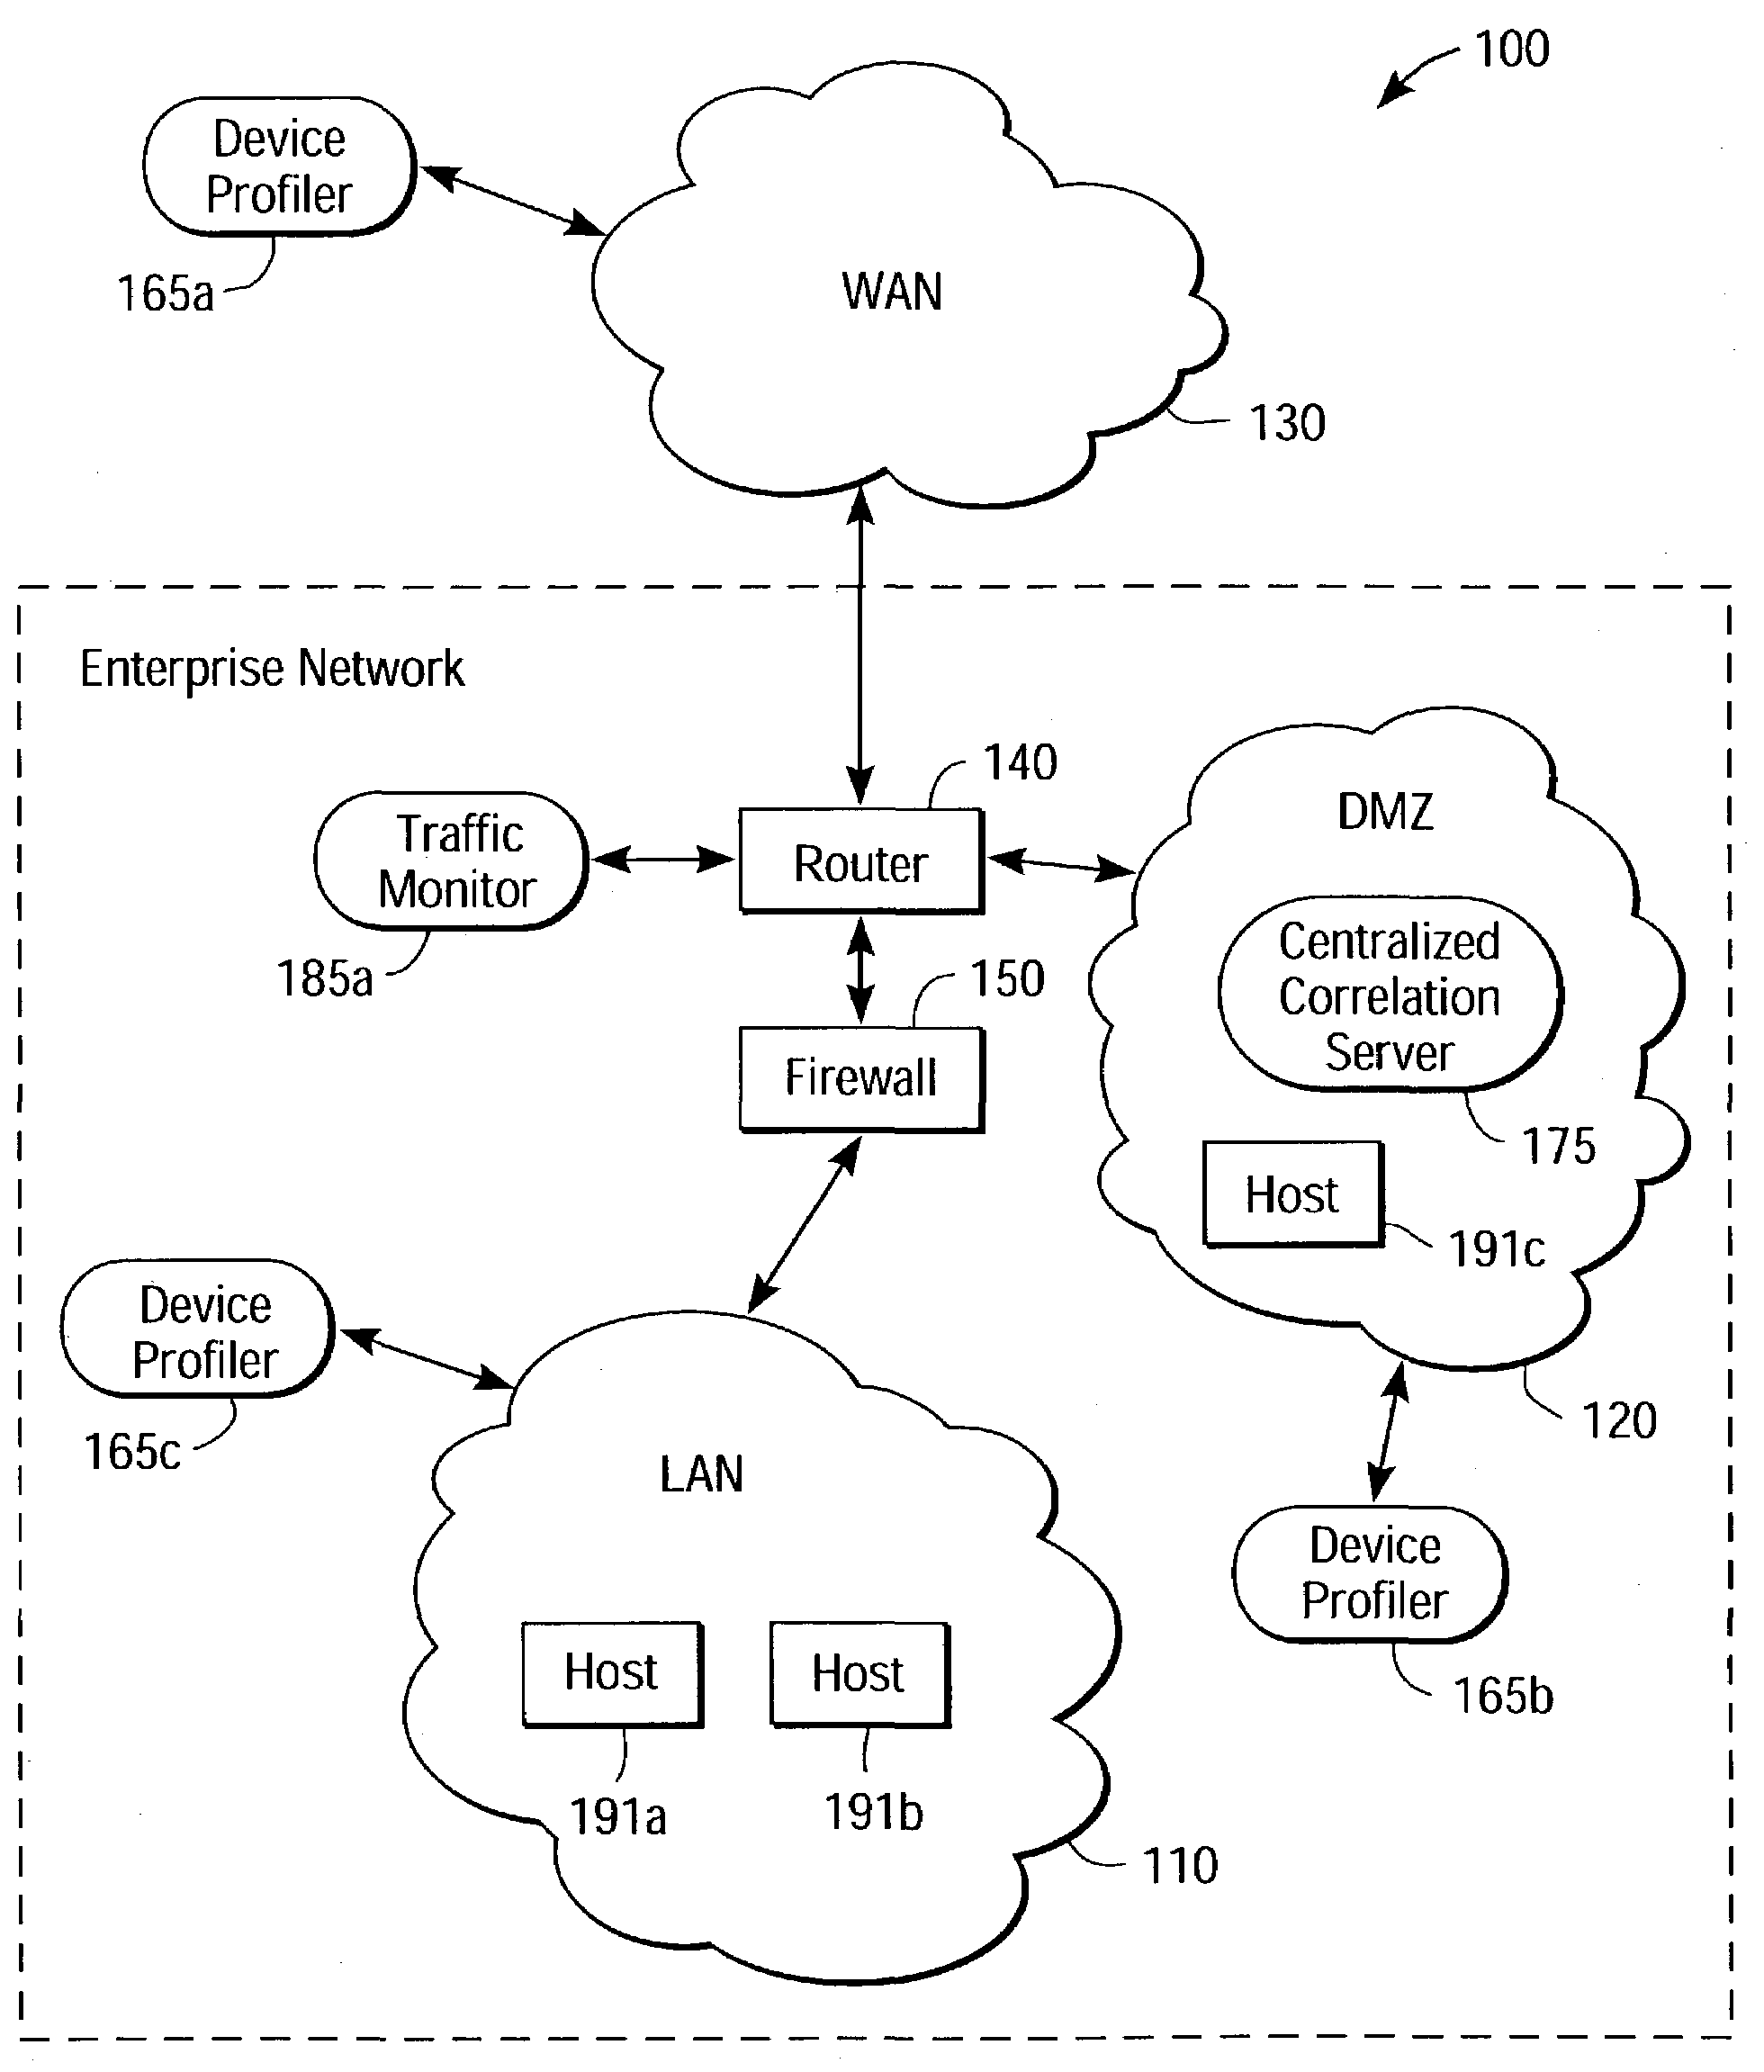 Network security system having a device profiler communicatively coupled to a traffic monitor